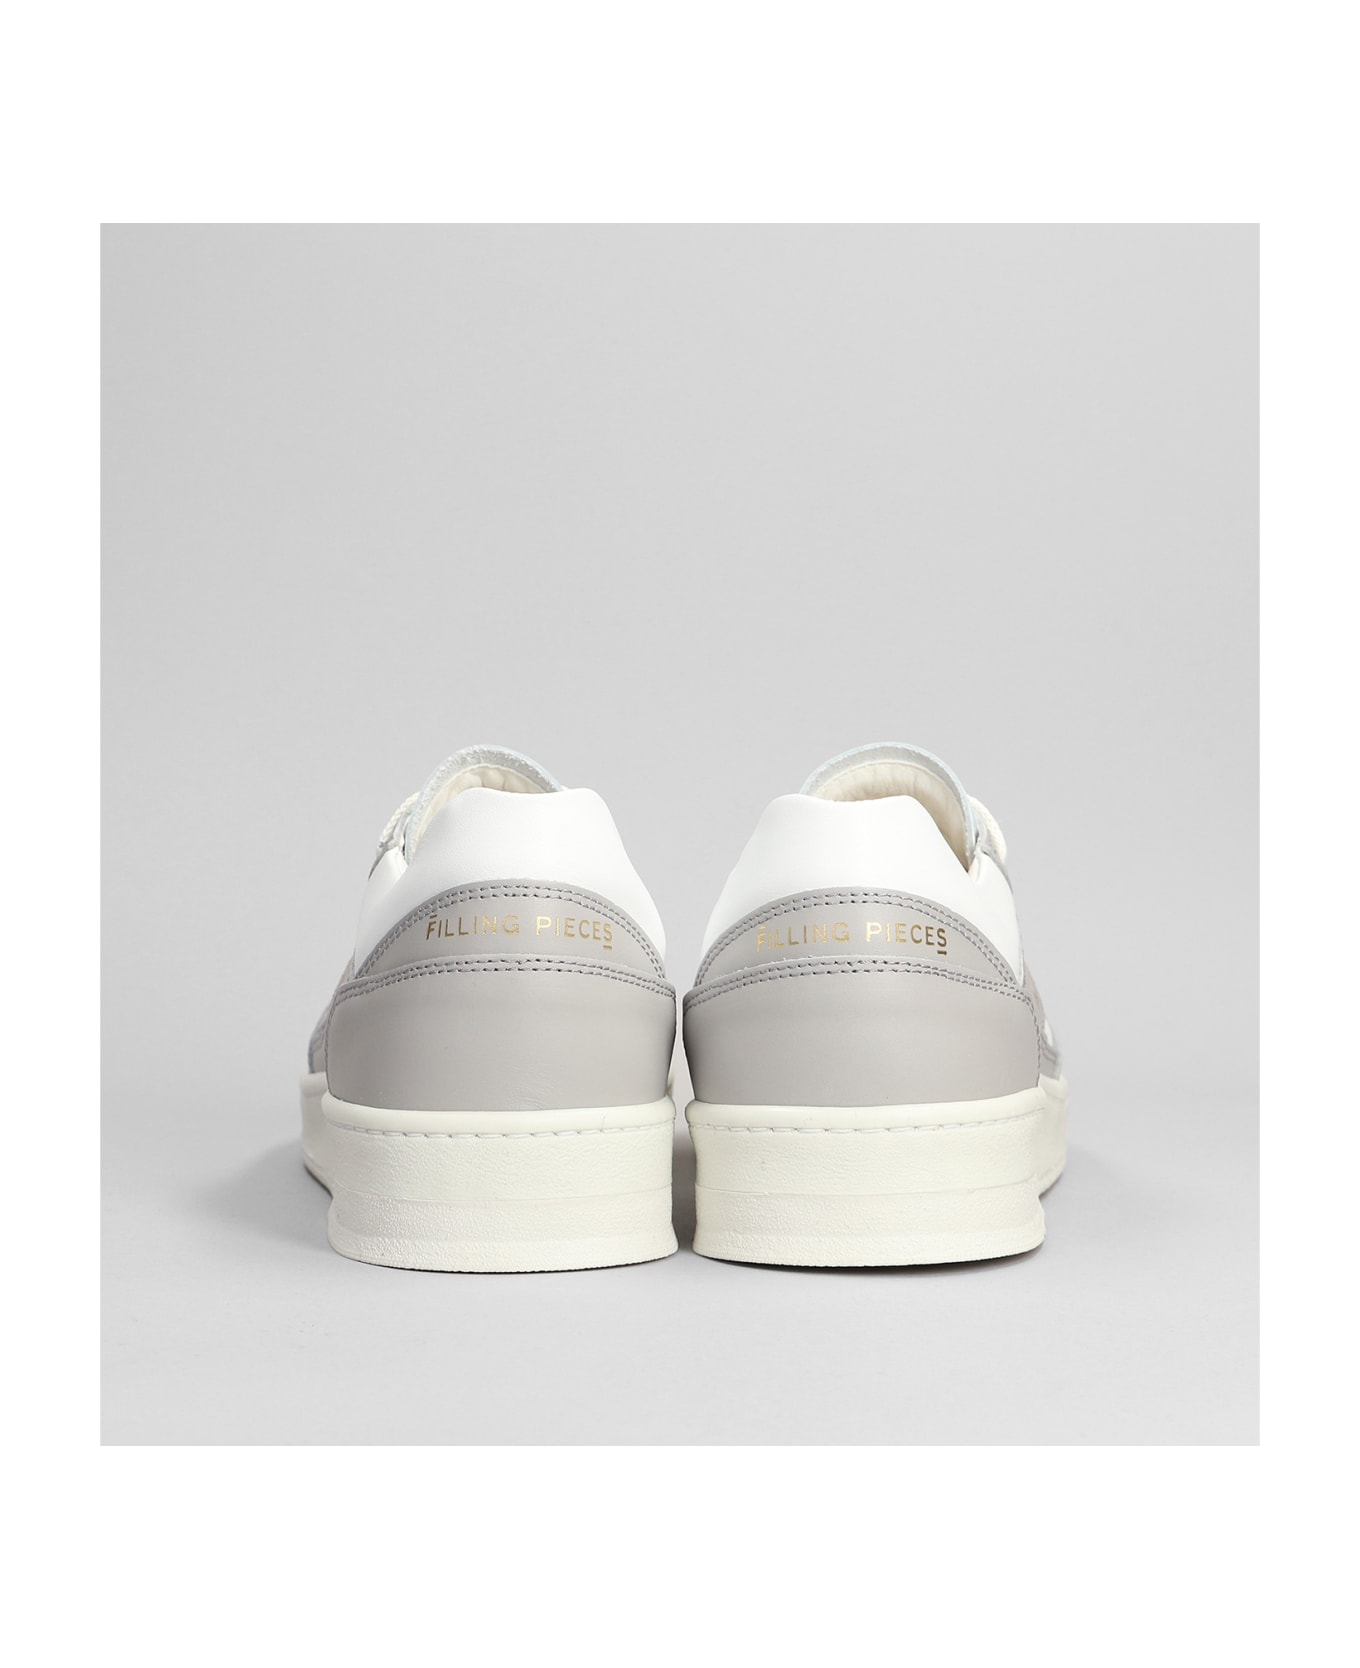 Filling Pieces Ace Spin Sneakers In Grey Leather - Grey